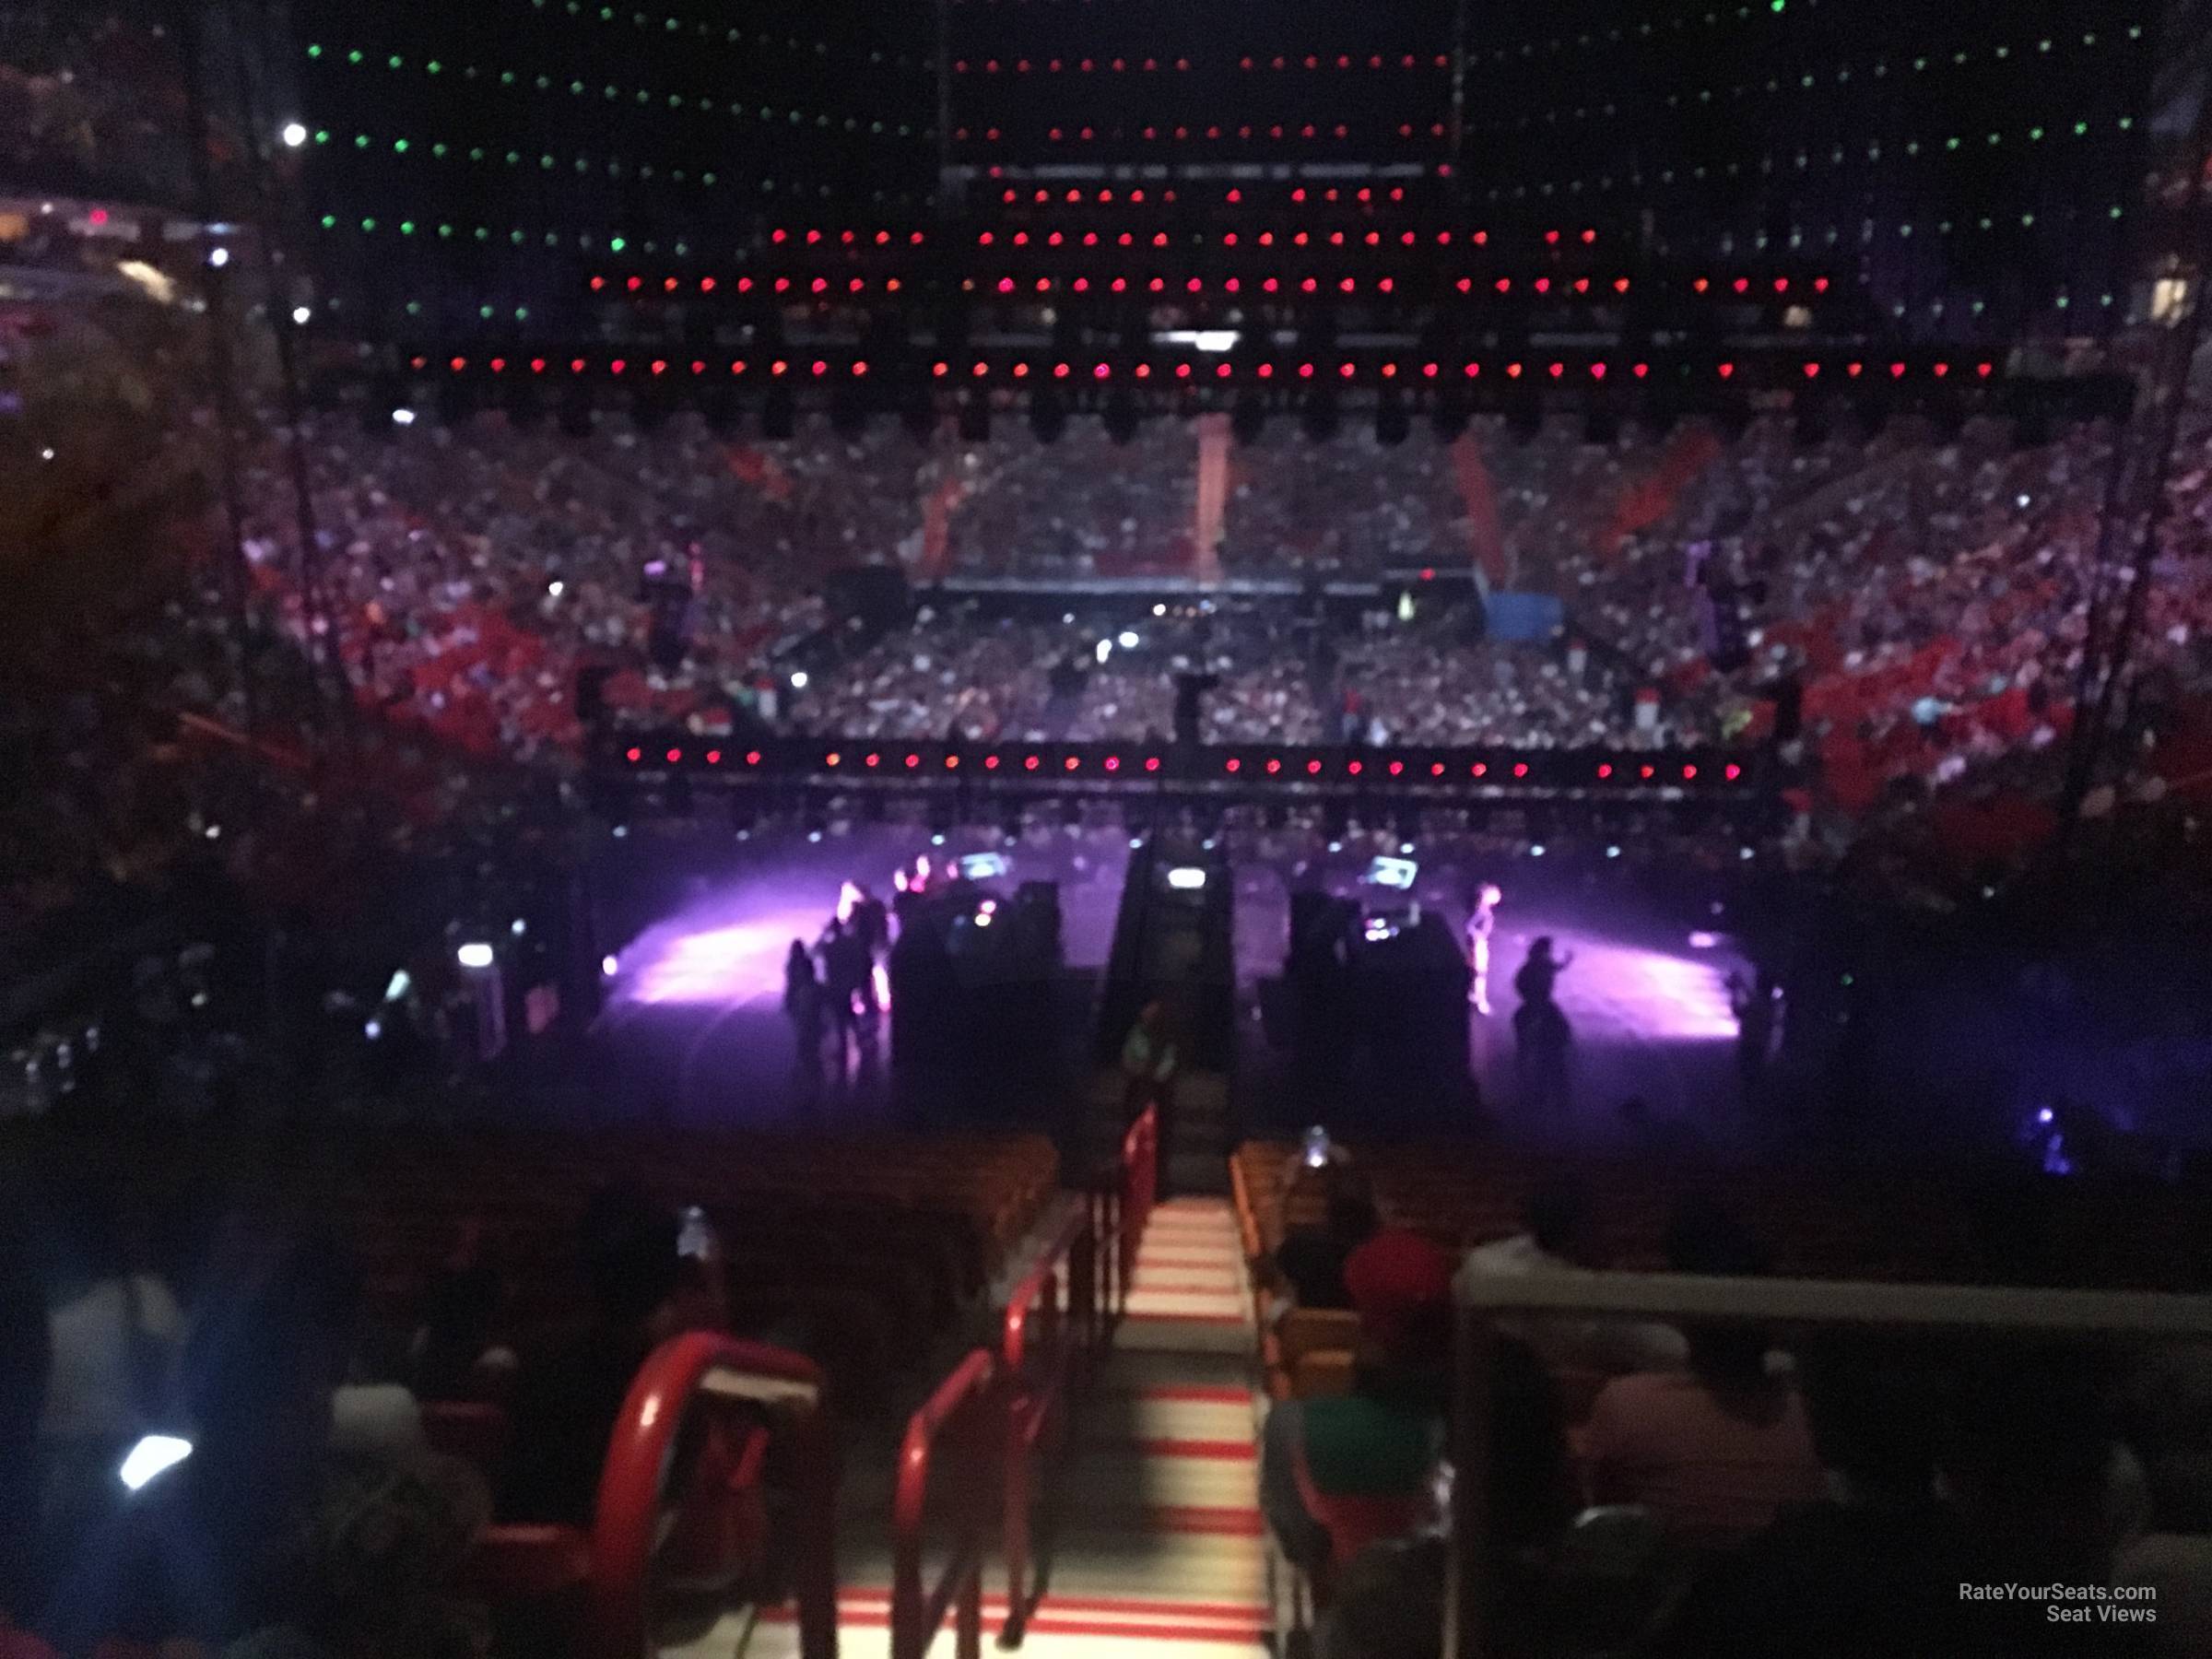 section 101, row 37 seat view  for concert - miami-dade arena